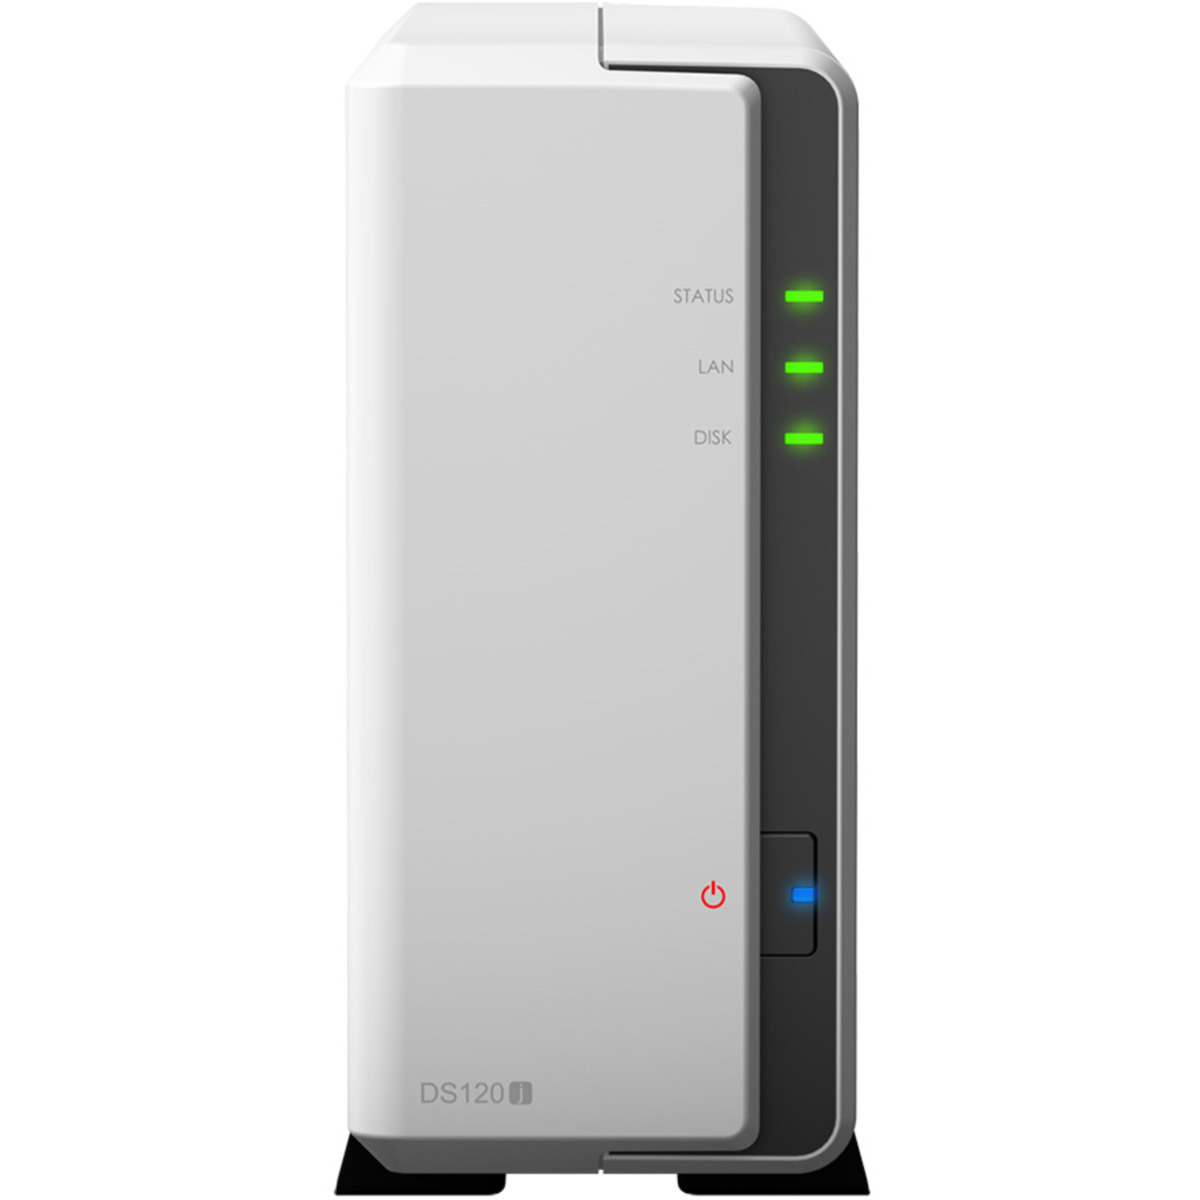 buy Synology DiskStation DS120j 24tb Desktop NAS - Network Attached Storage Device 1x24000gb Western Digital Ultrastar HC580 WUH722424ALE6L4 3.5 7200rpm SATA 6Gb/s HDD ENTERPRISE Class Drives Installed - Burn-In Tested - nas headquarters buy network attached storage server device das new raid-5 free shipping usa spring sale DiskStation DS120j